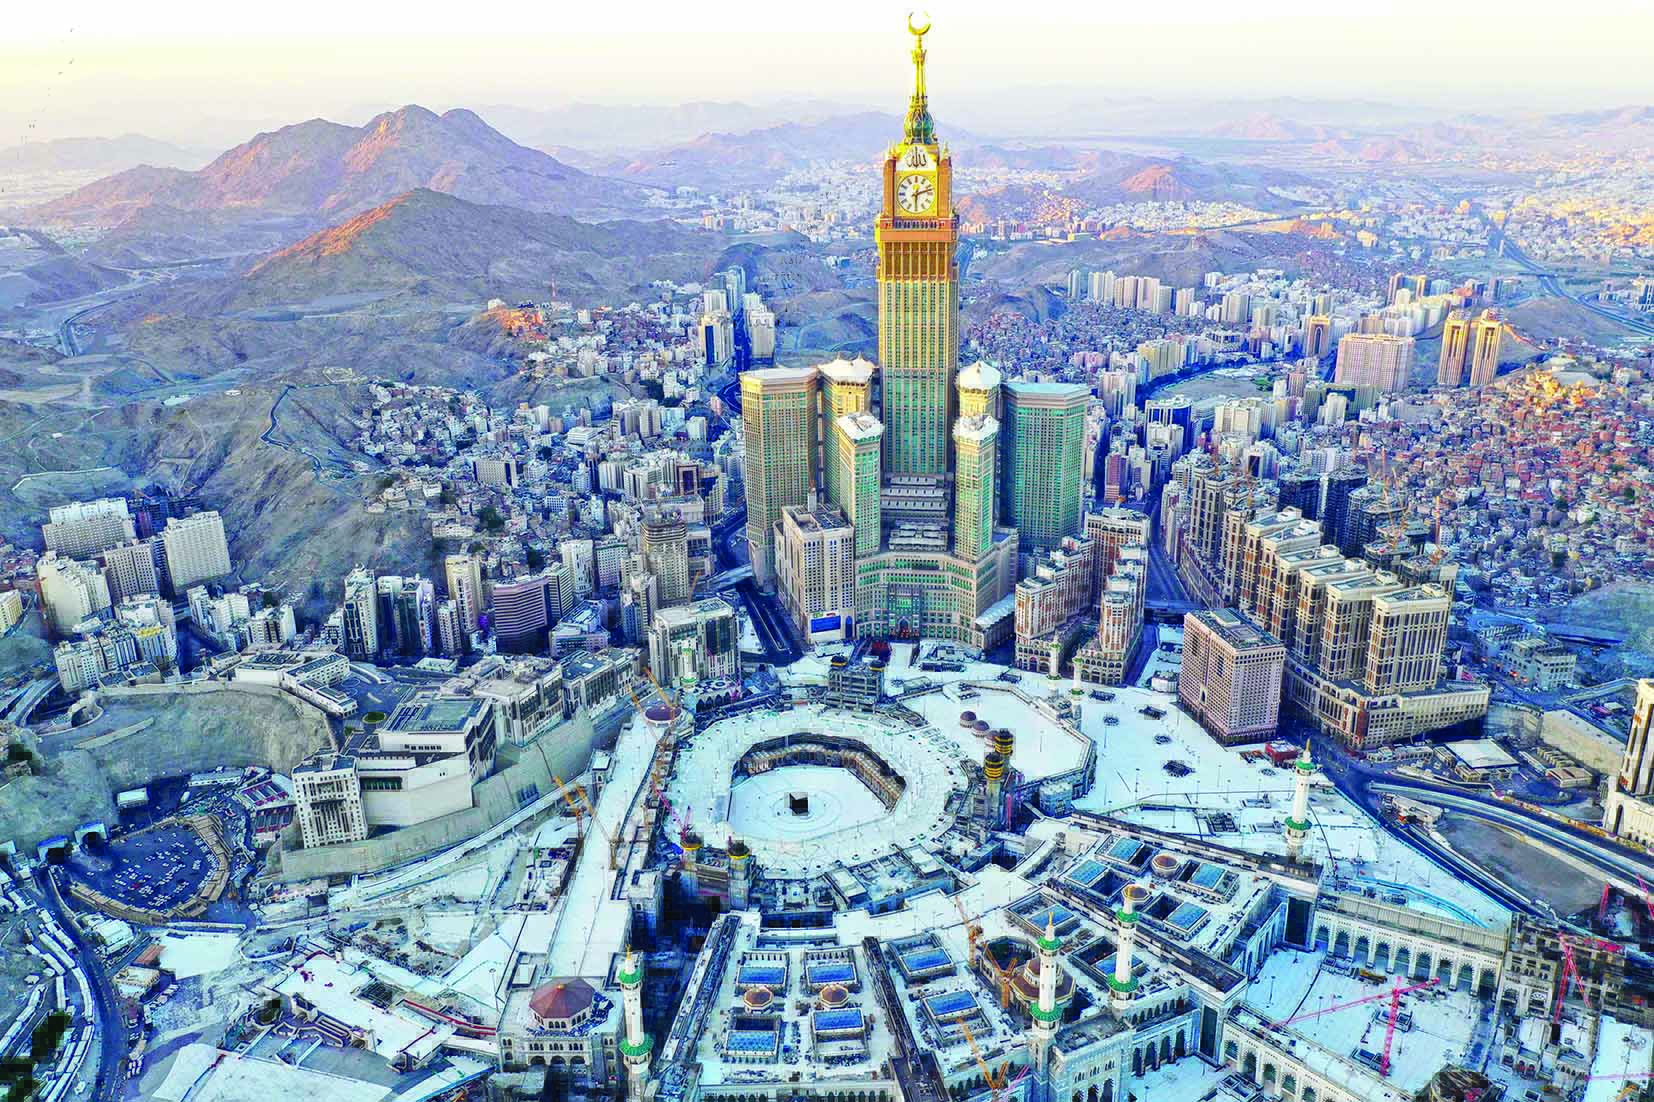 TOPSHOT - An aerial view shows the Great Mosque and the Mecca Tower,  deserted on the first day of the Muslim fasting month of Ramadan, in the Saudi holy city of Mecca, on April 24, 2020, during the novel coronavirus pandemic crisis. (Photo by BANDAR ALDANDANI / AFP)